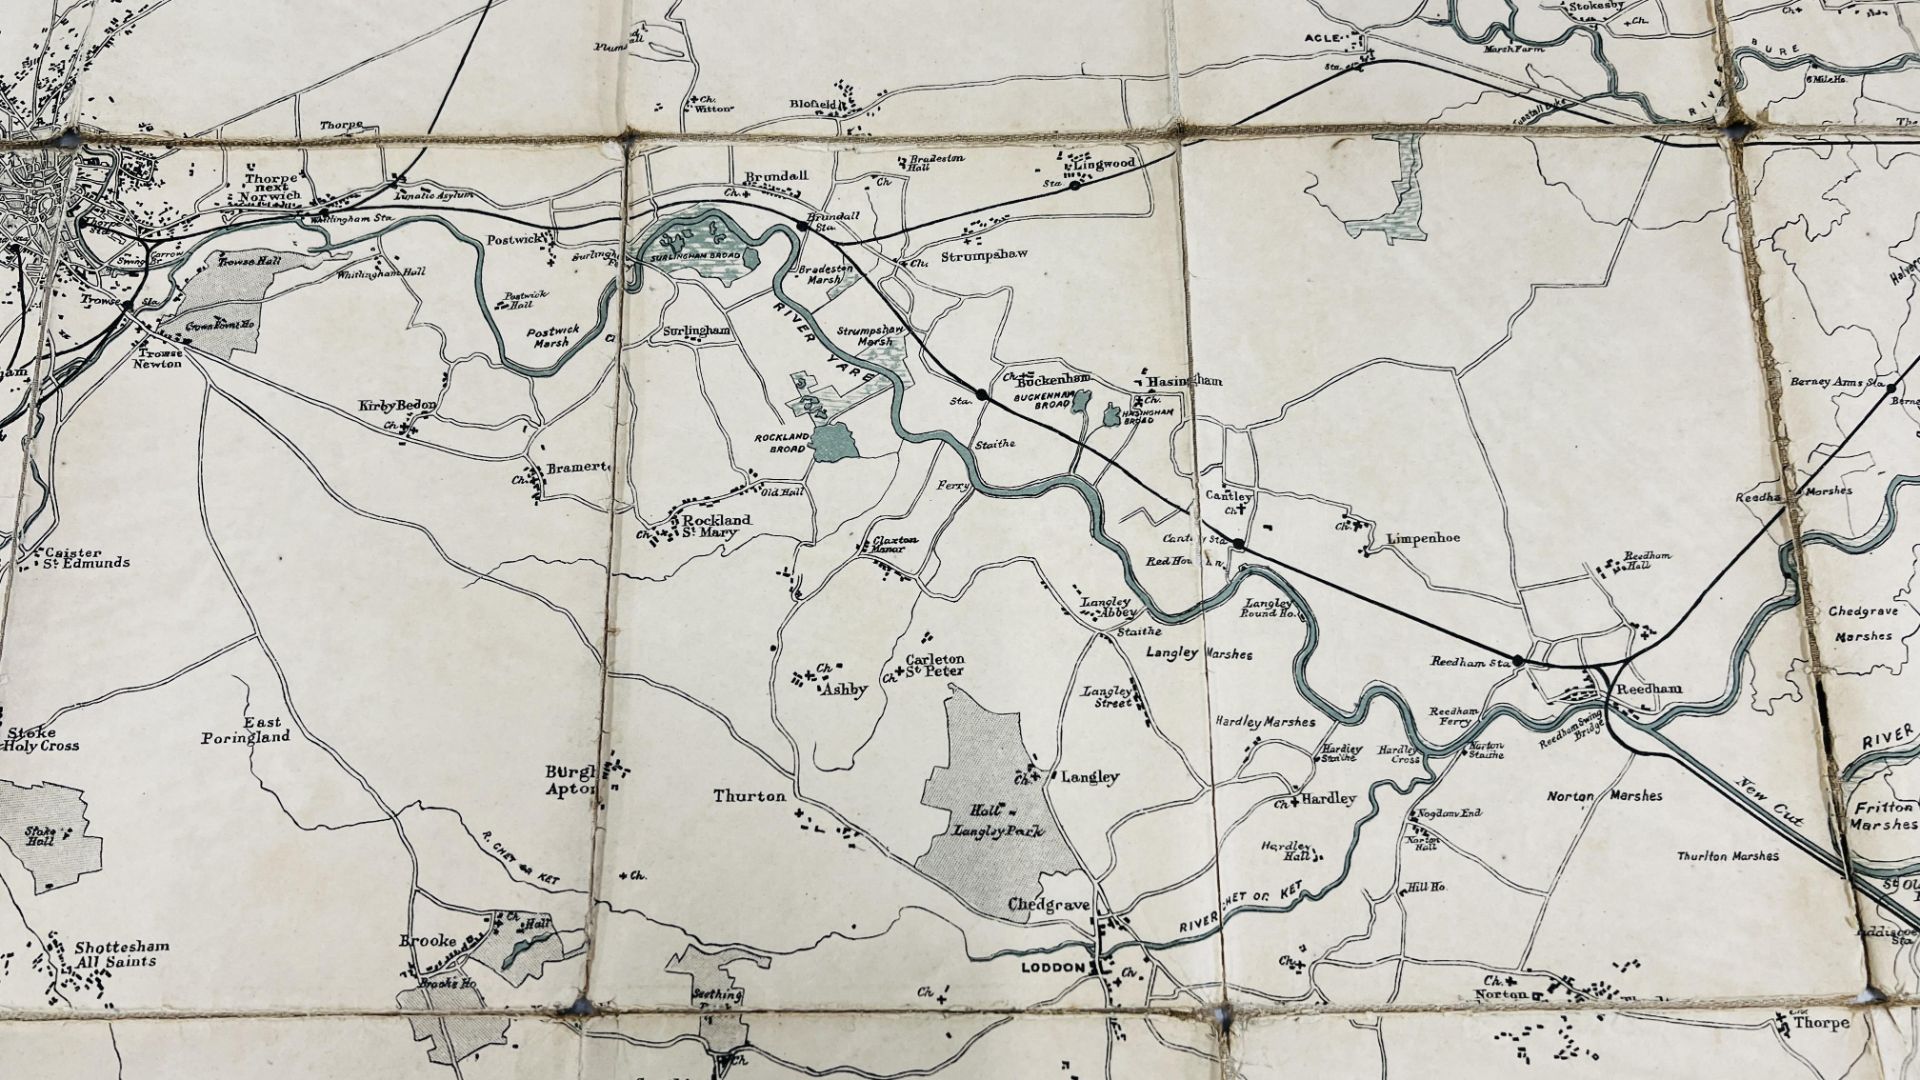 A VINTAGE MAP MARKED "JARROLDS" MAP OF THE RIVERS AND BROADS OF NORFOLK AND SUFFOLK MOUNTED ON A - Image 9 of 17